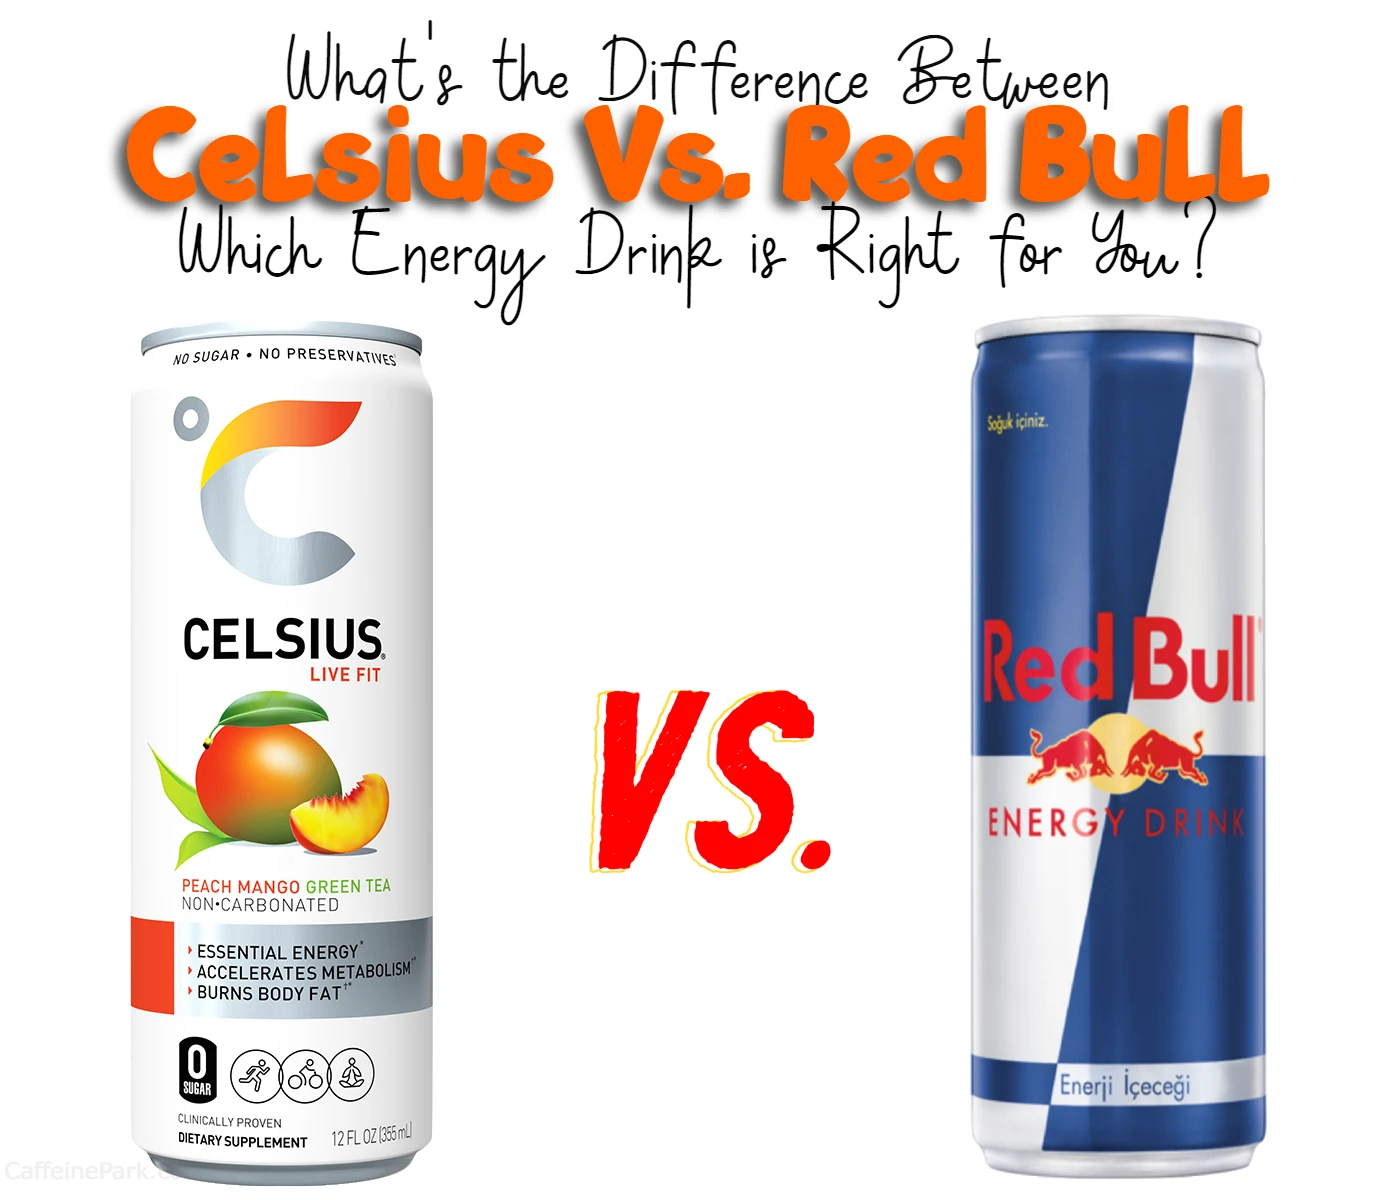 Differences between Celsius and Red Bull